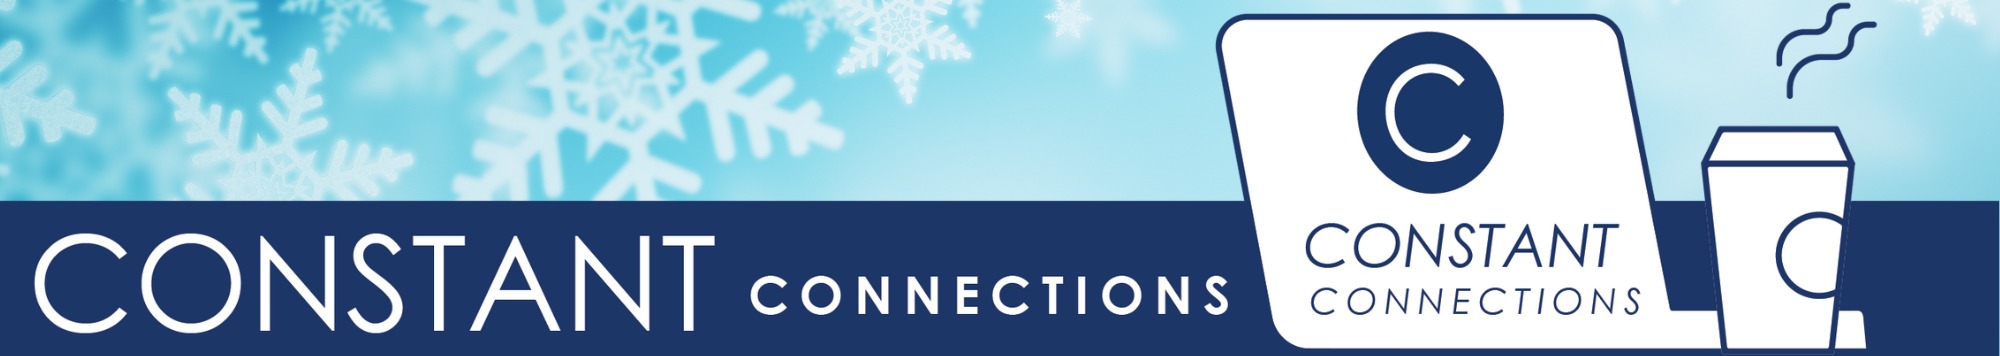 CONSTANT Connections background with snowflakes